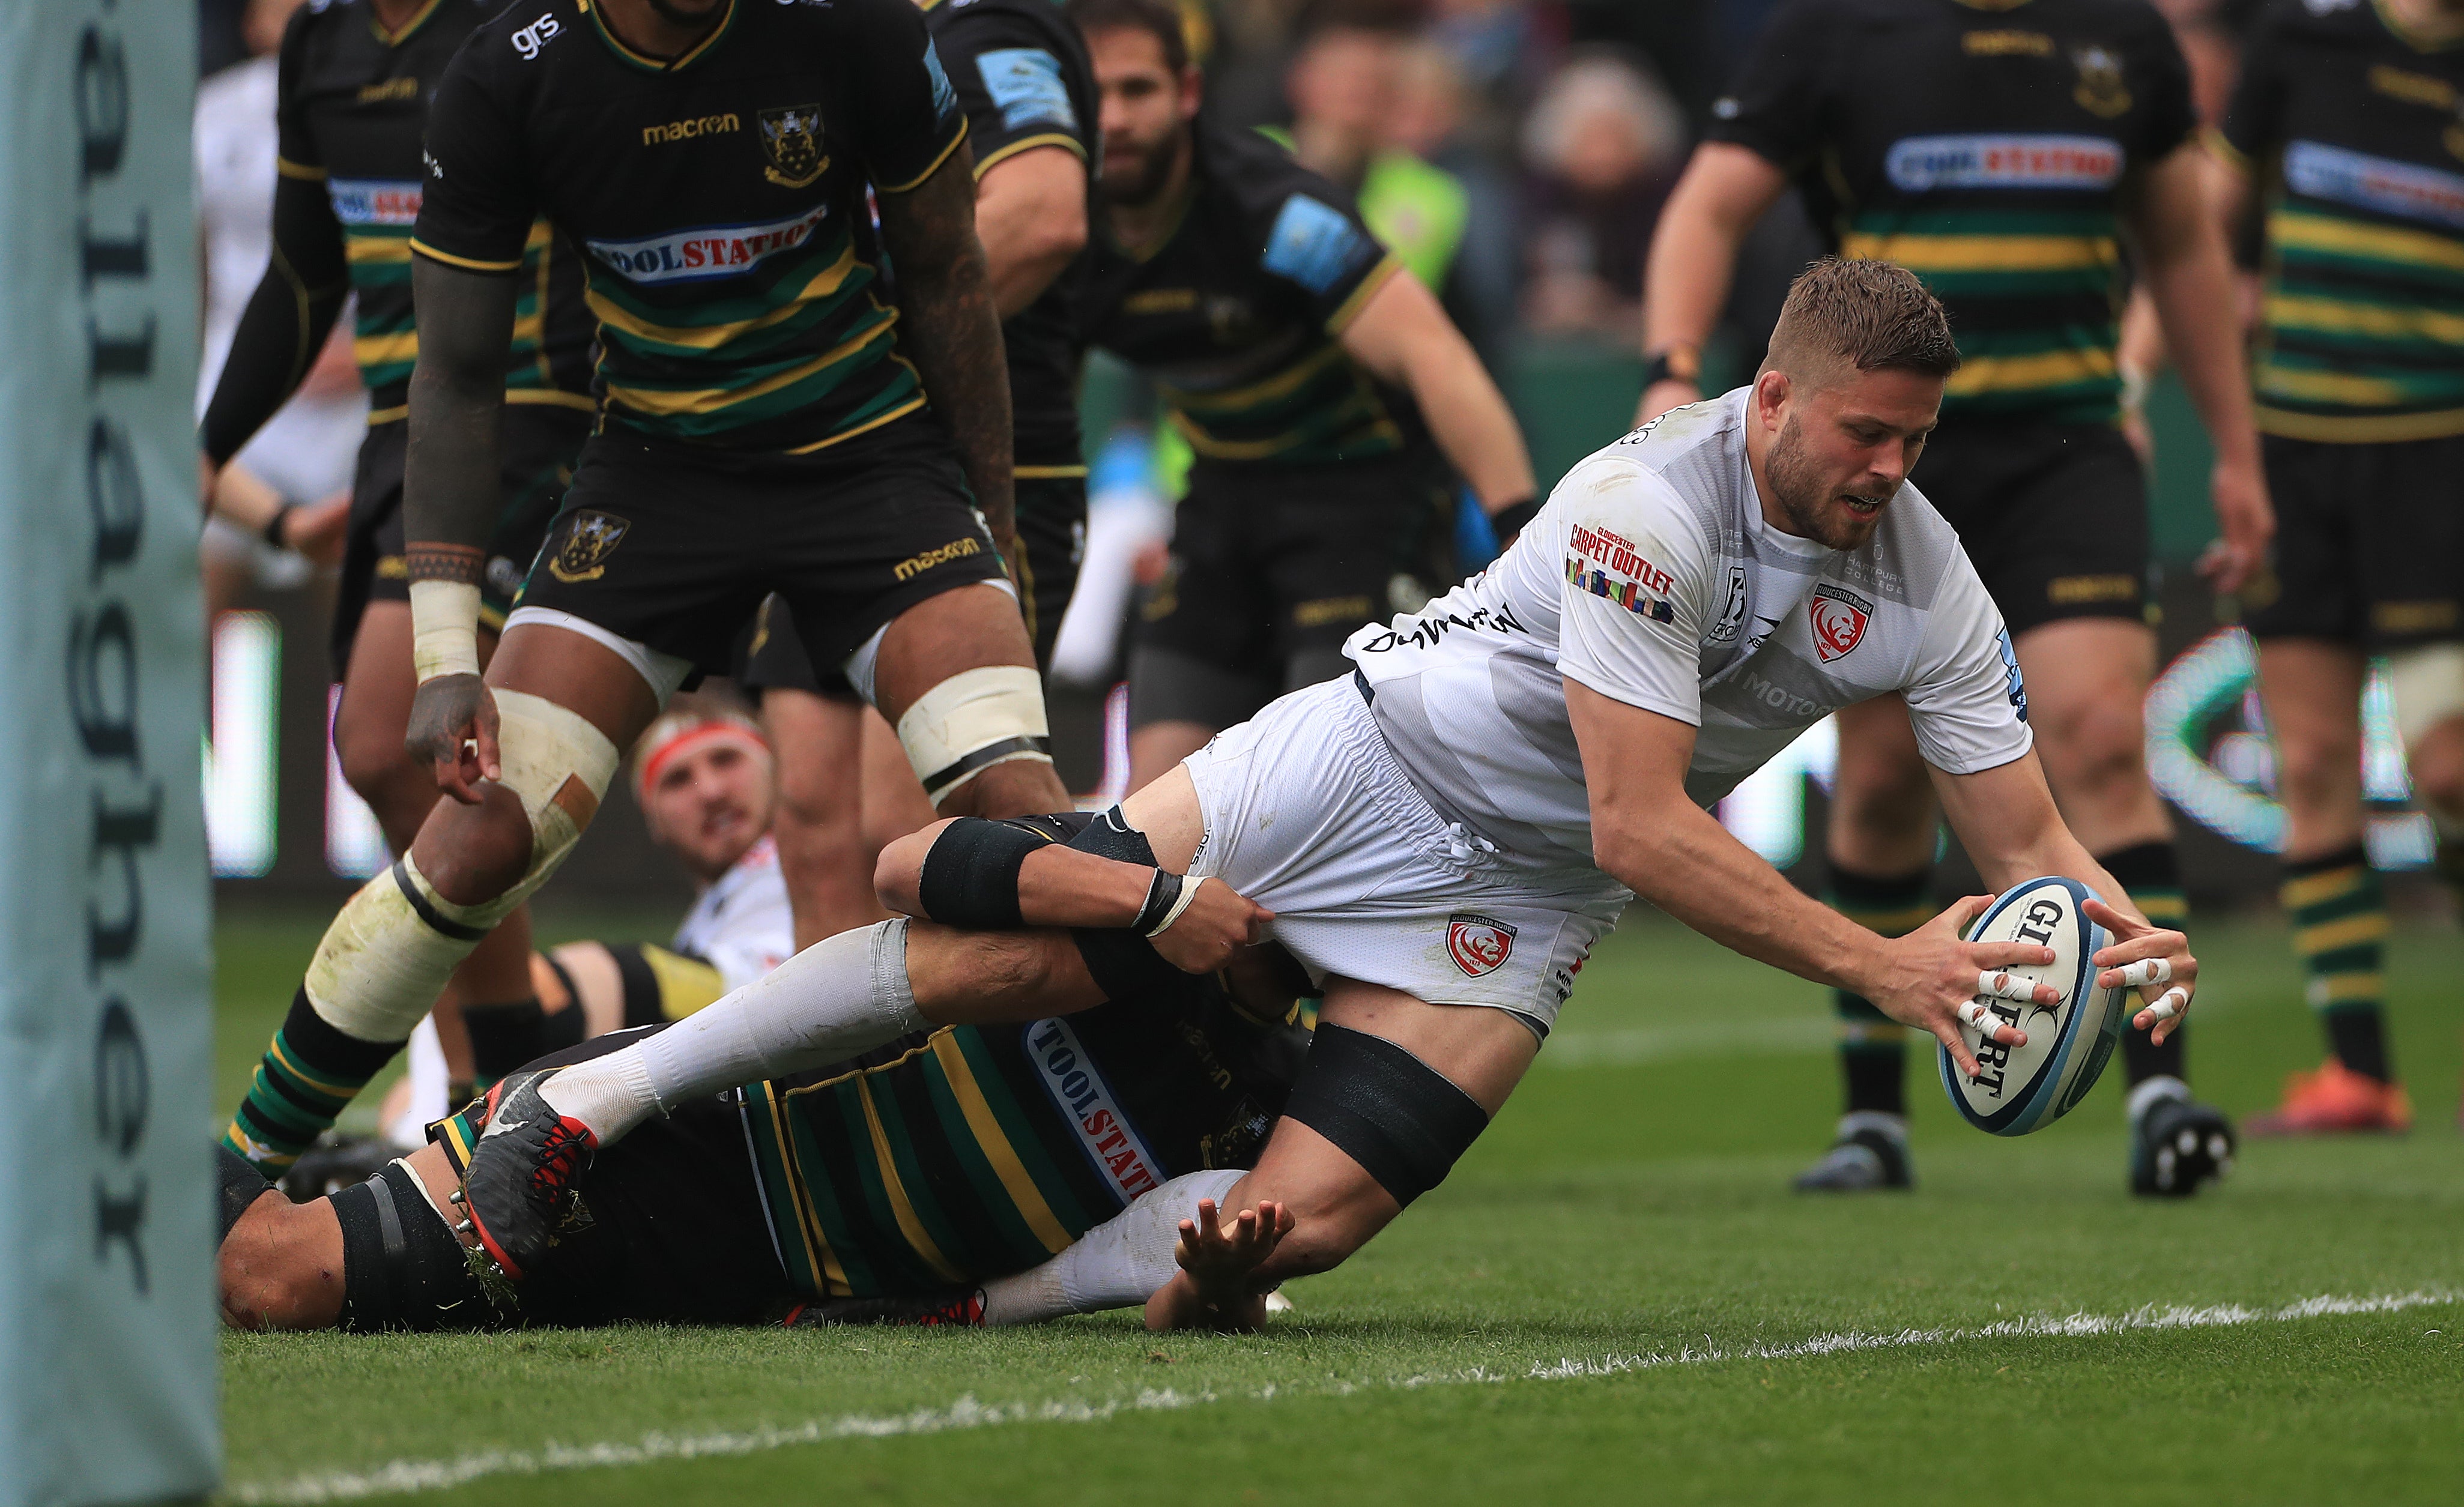 Ed Slater scores a try for Gloucester against Northampton (Mike Egerton/PA)